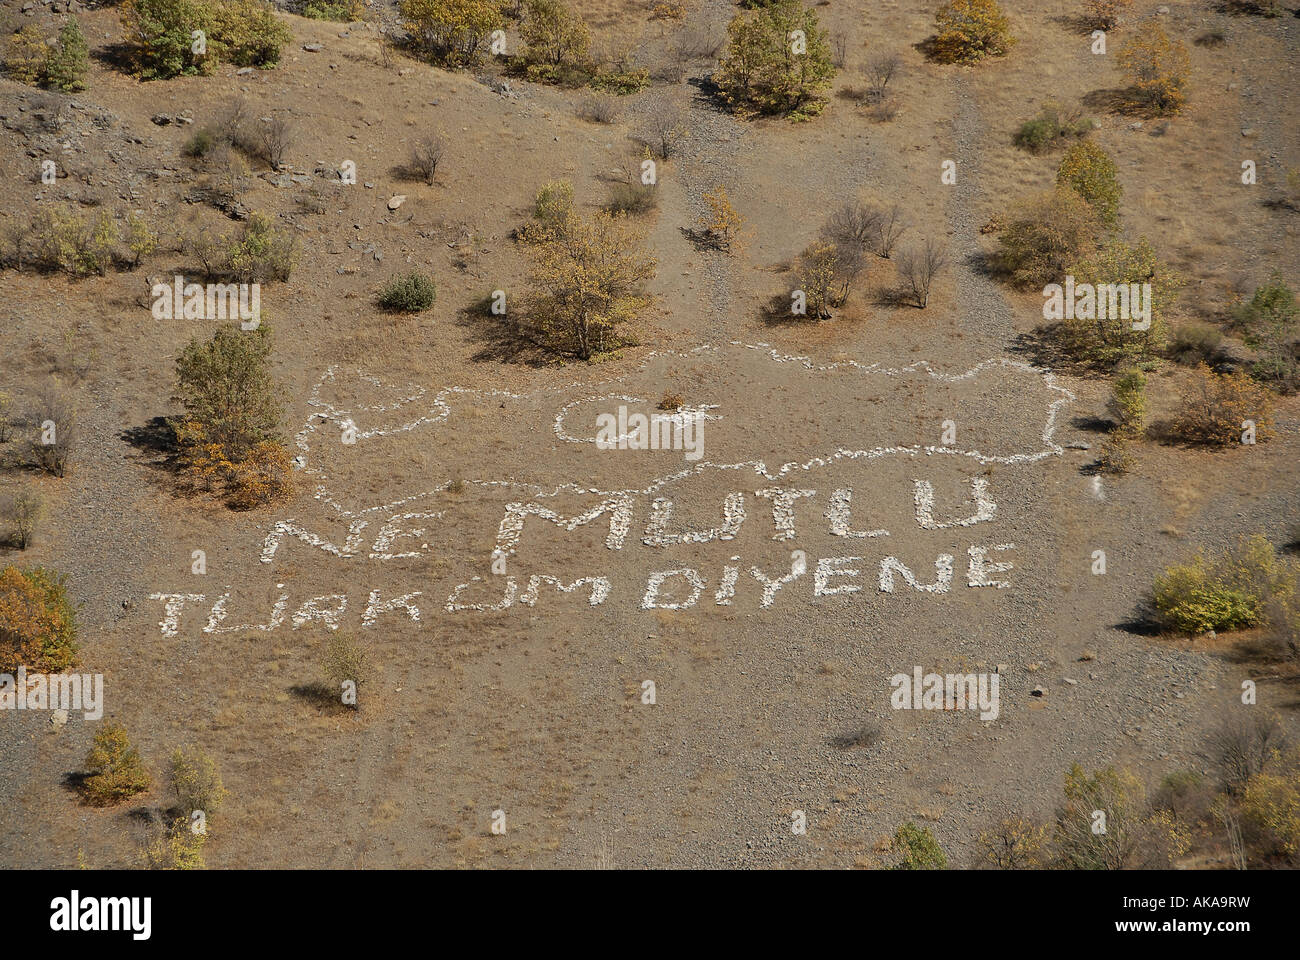 Writing in Turkish reads 'How happy is the one who says I am a Turk' in a remote mountainous area near the border with Iraq in Turkey Stock Photo